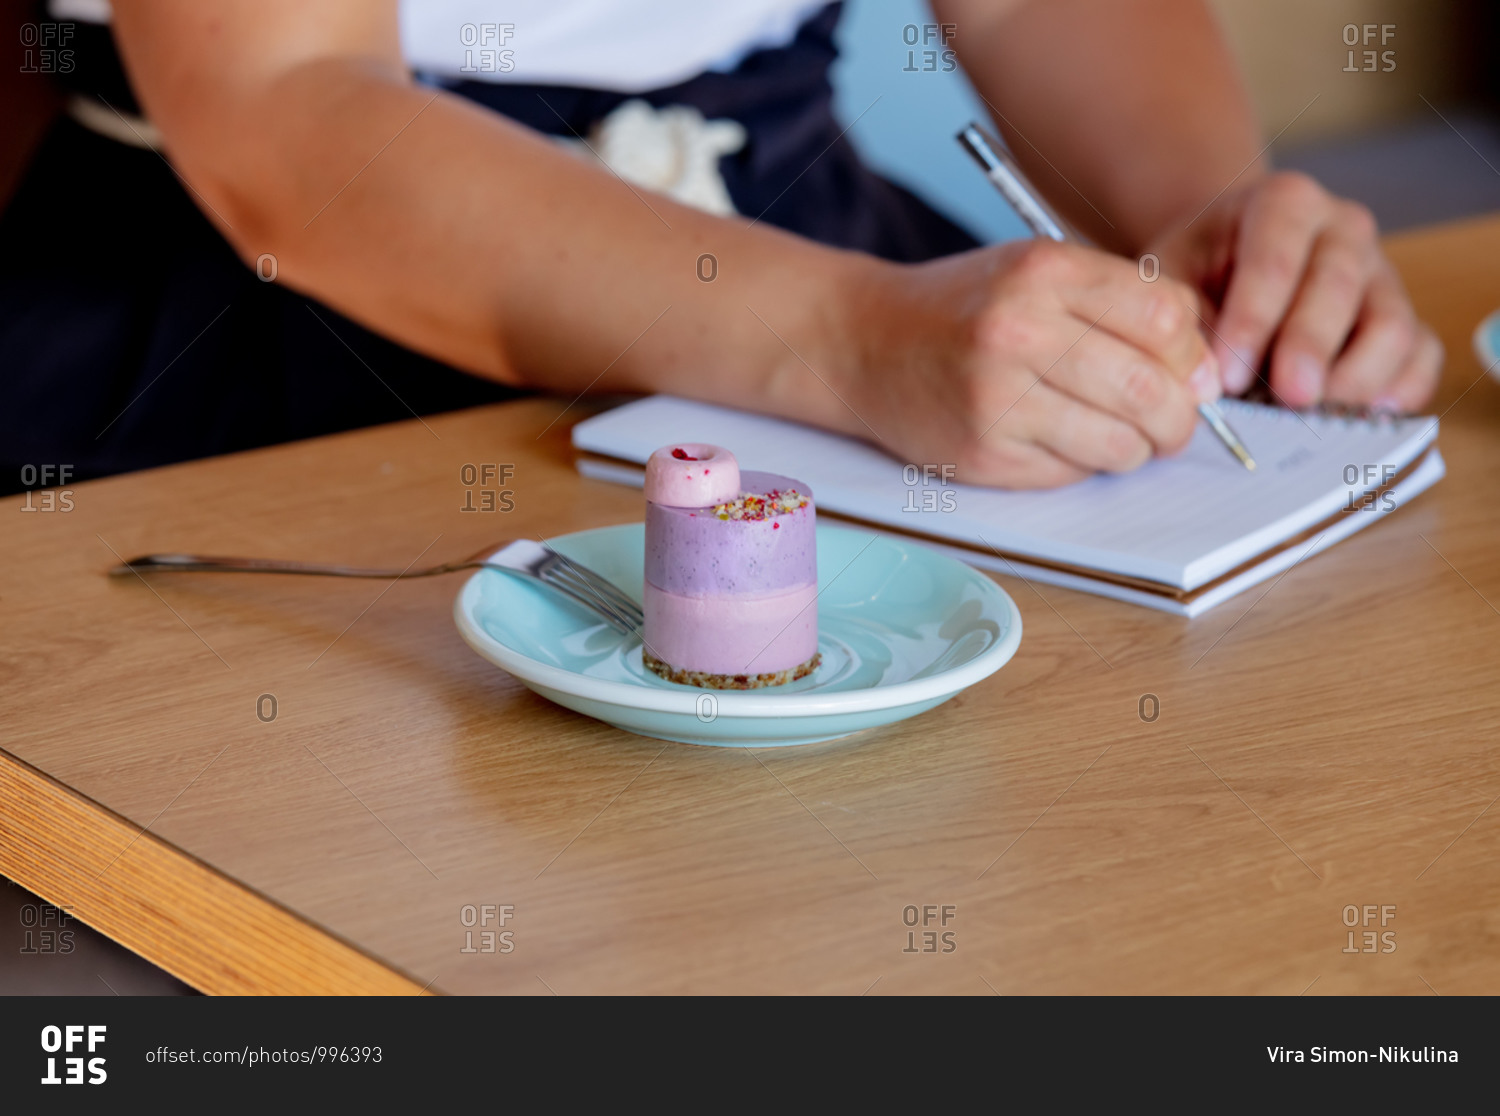 Woman writing in a notebook on a table in a cafe beside a gluten-free cake